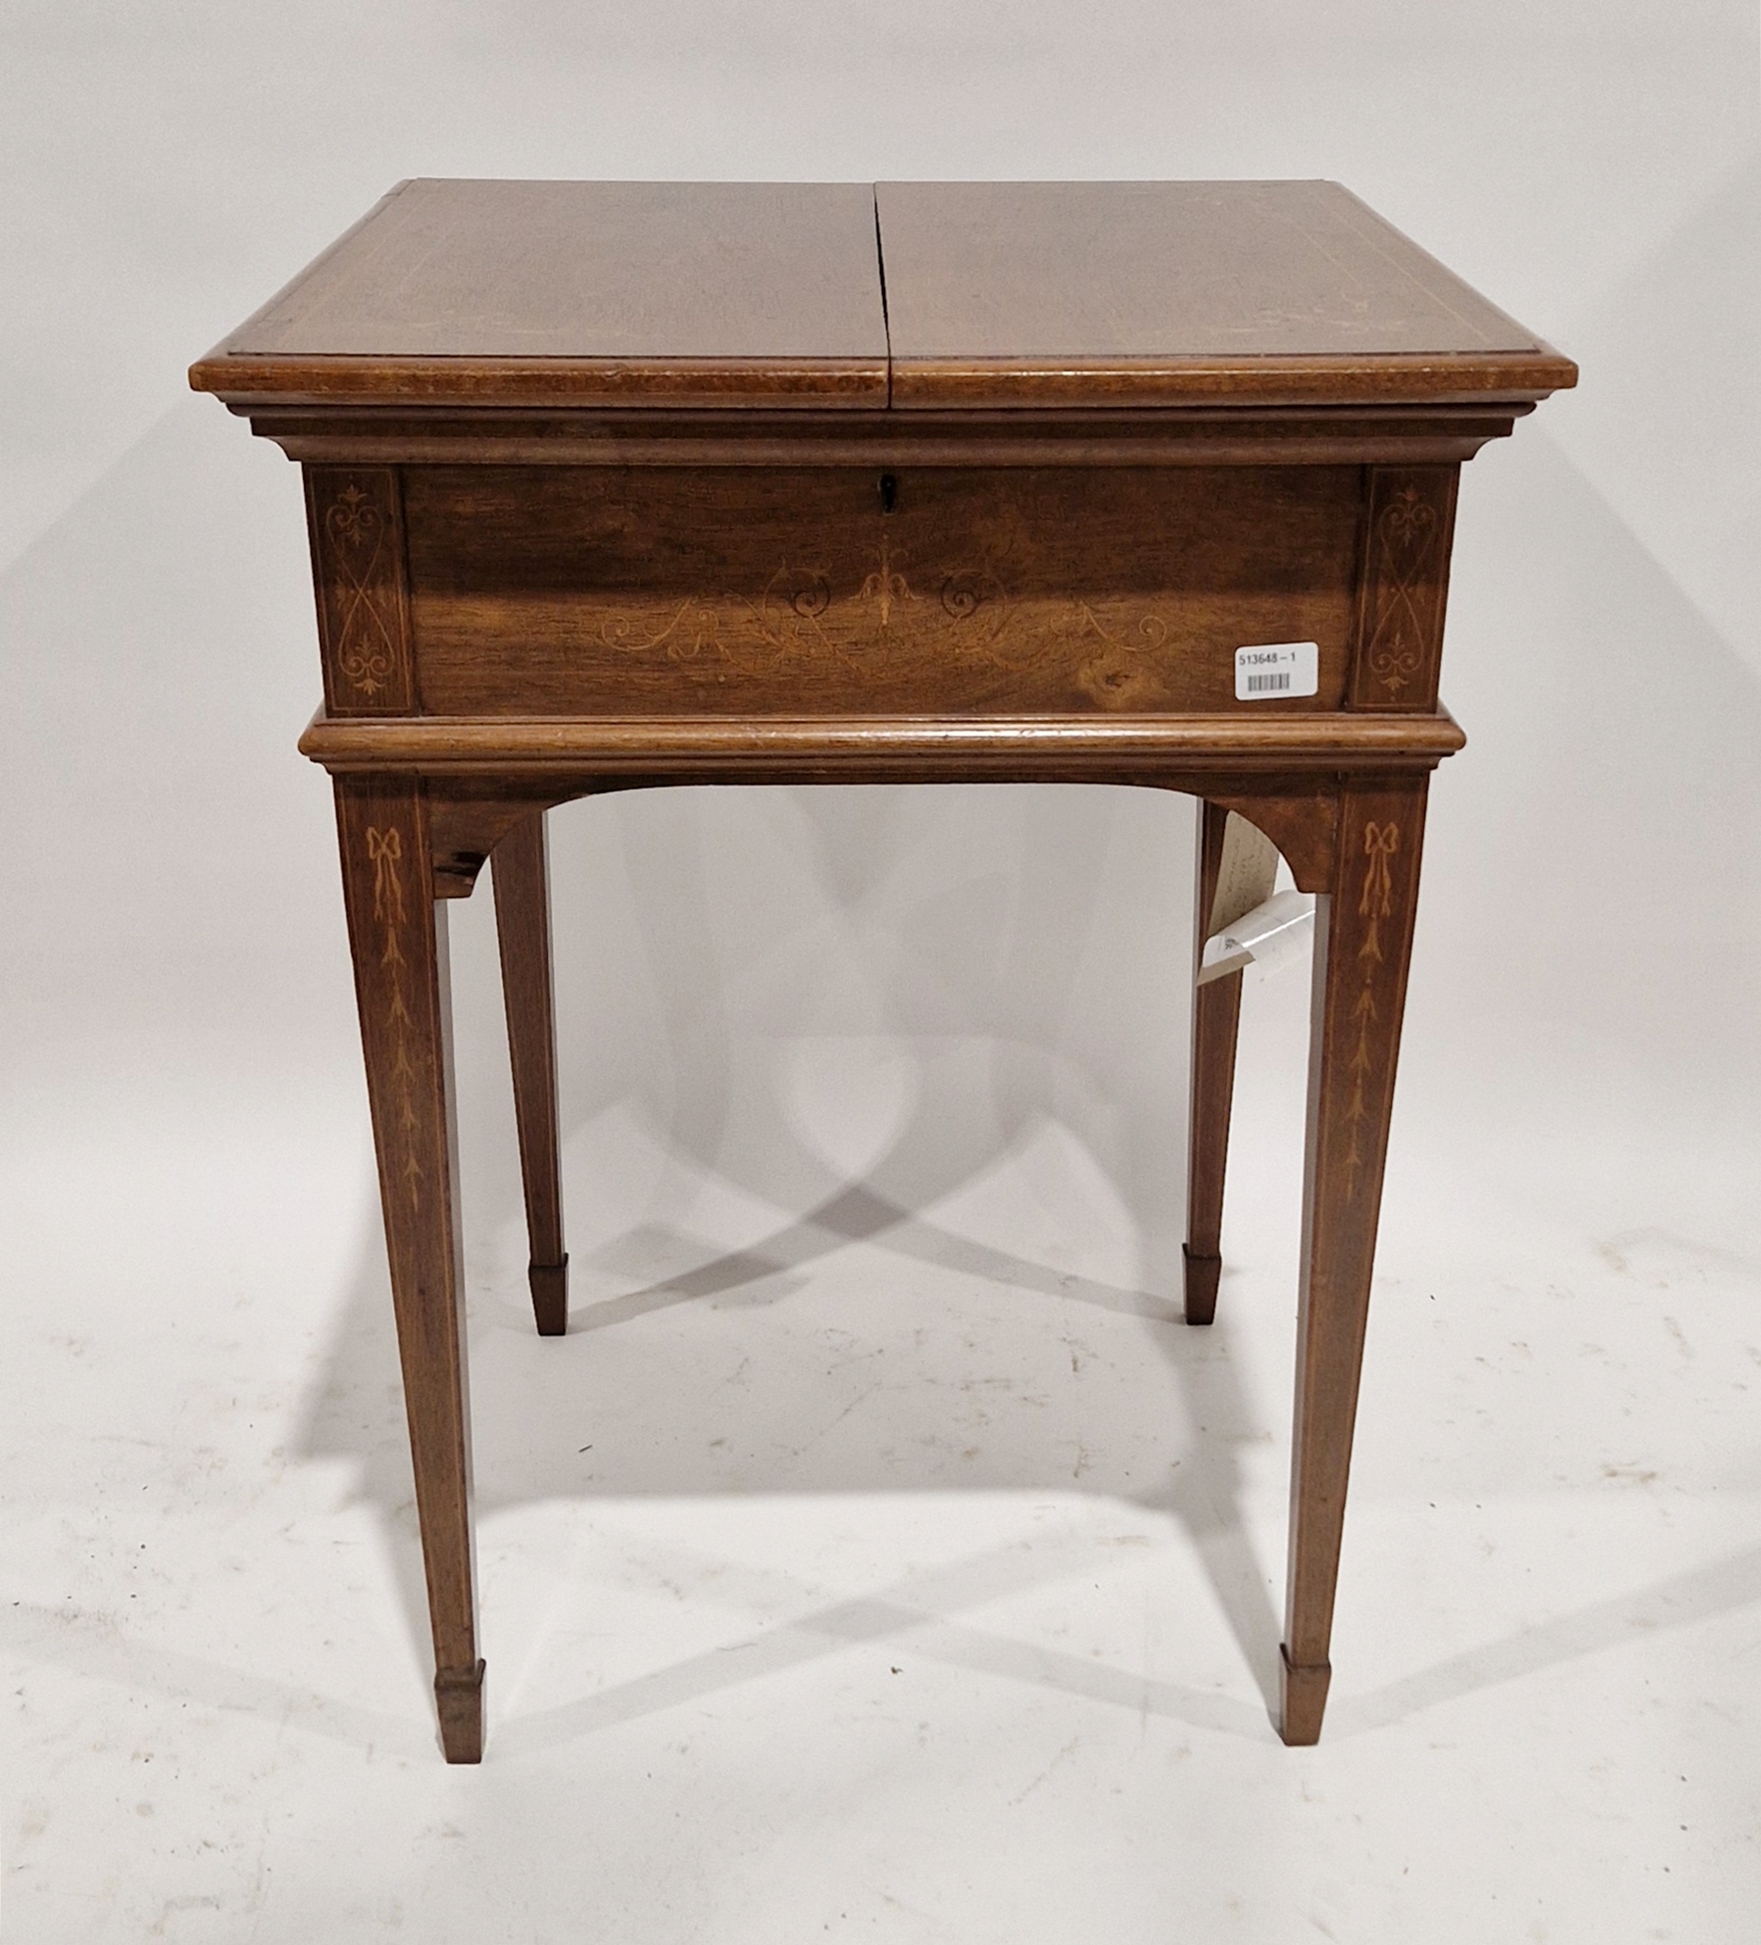 Late 19th/early 20th century inlaid rosewood writing desk, the hinged top revealing a rising